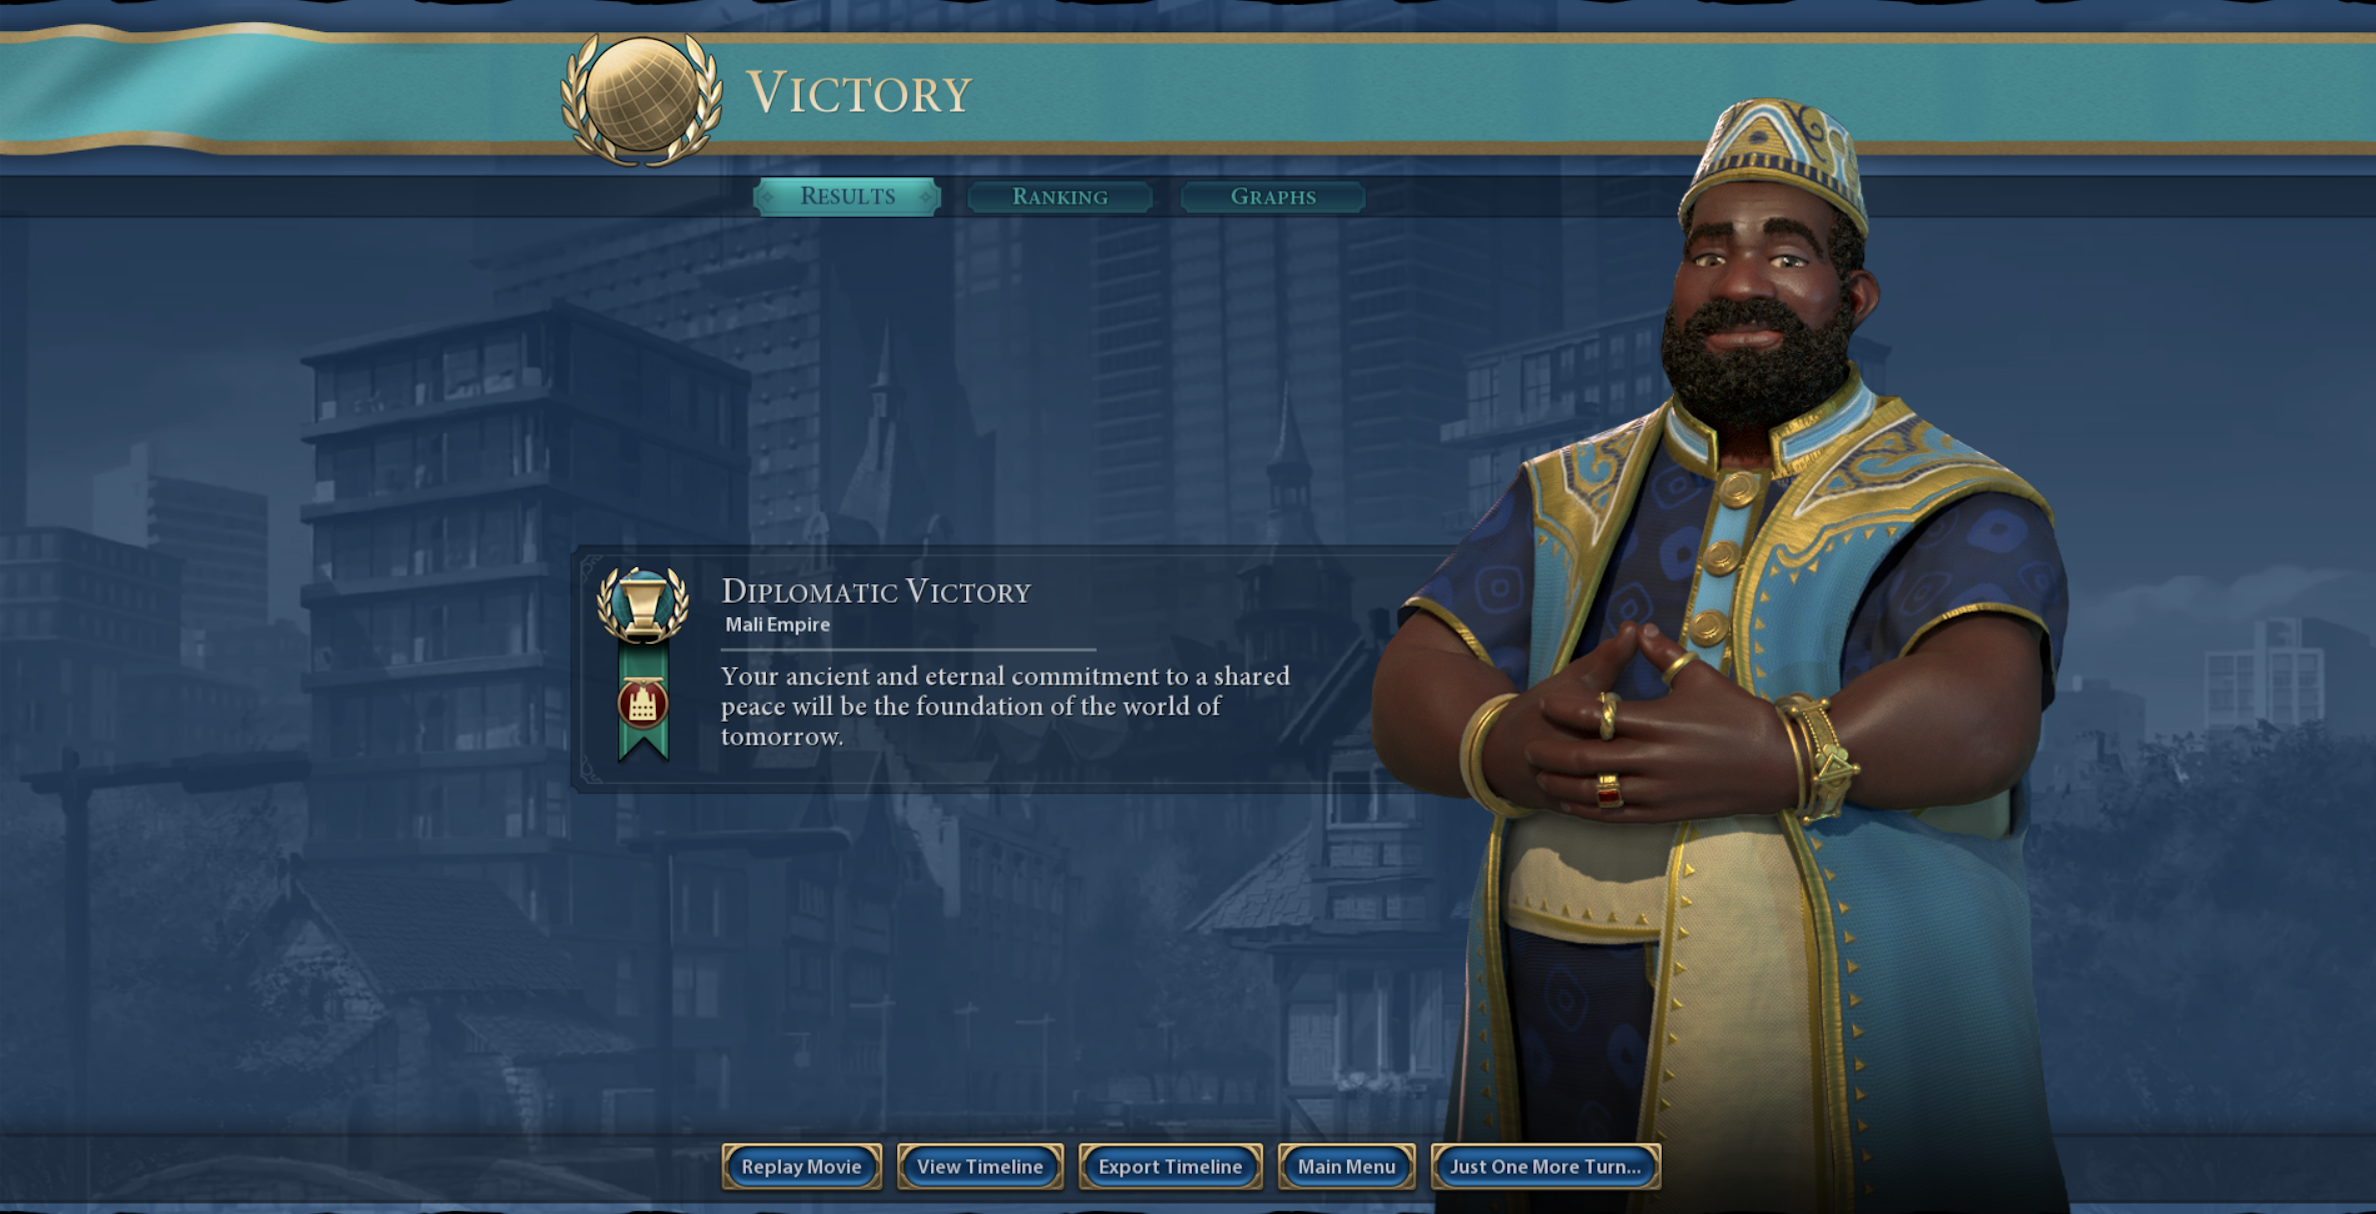 Civ 6 victory screen showing a diplomatic victory for the Mali Empire